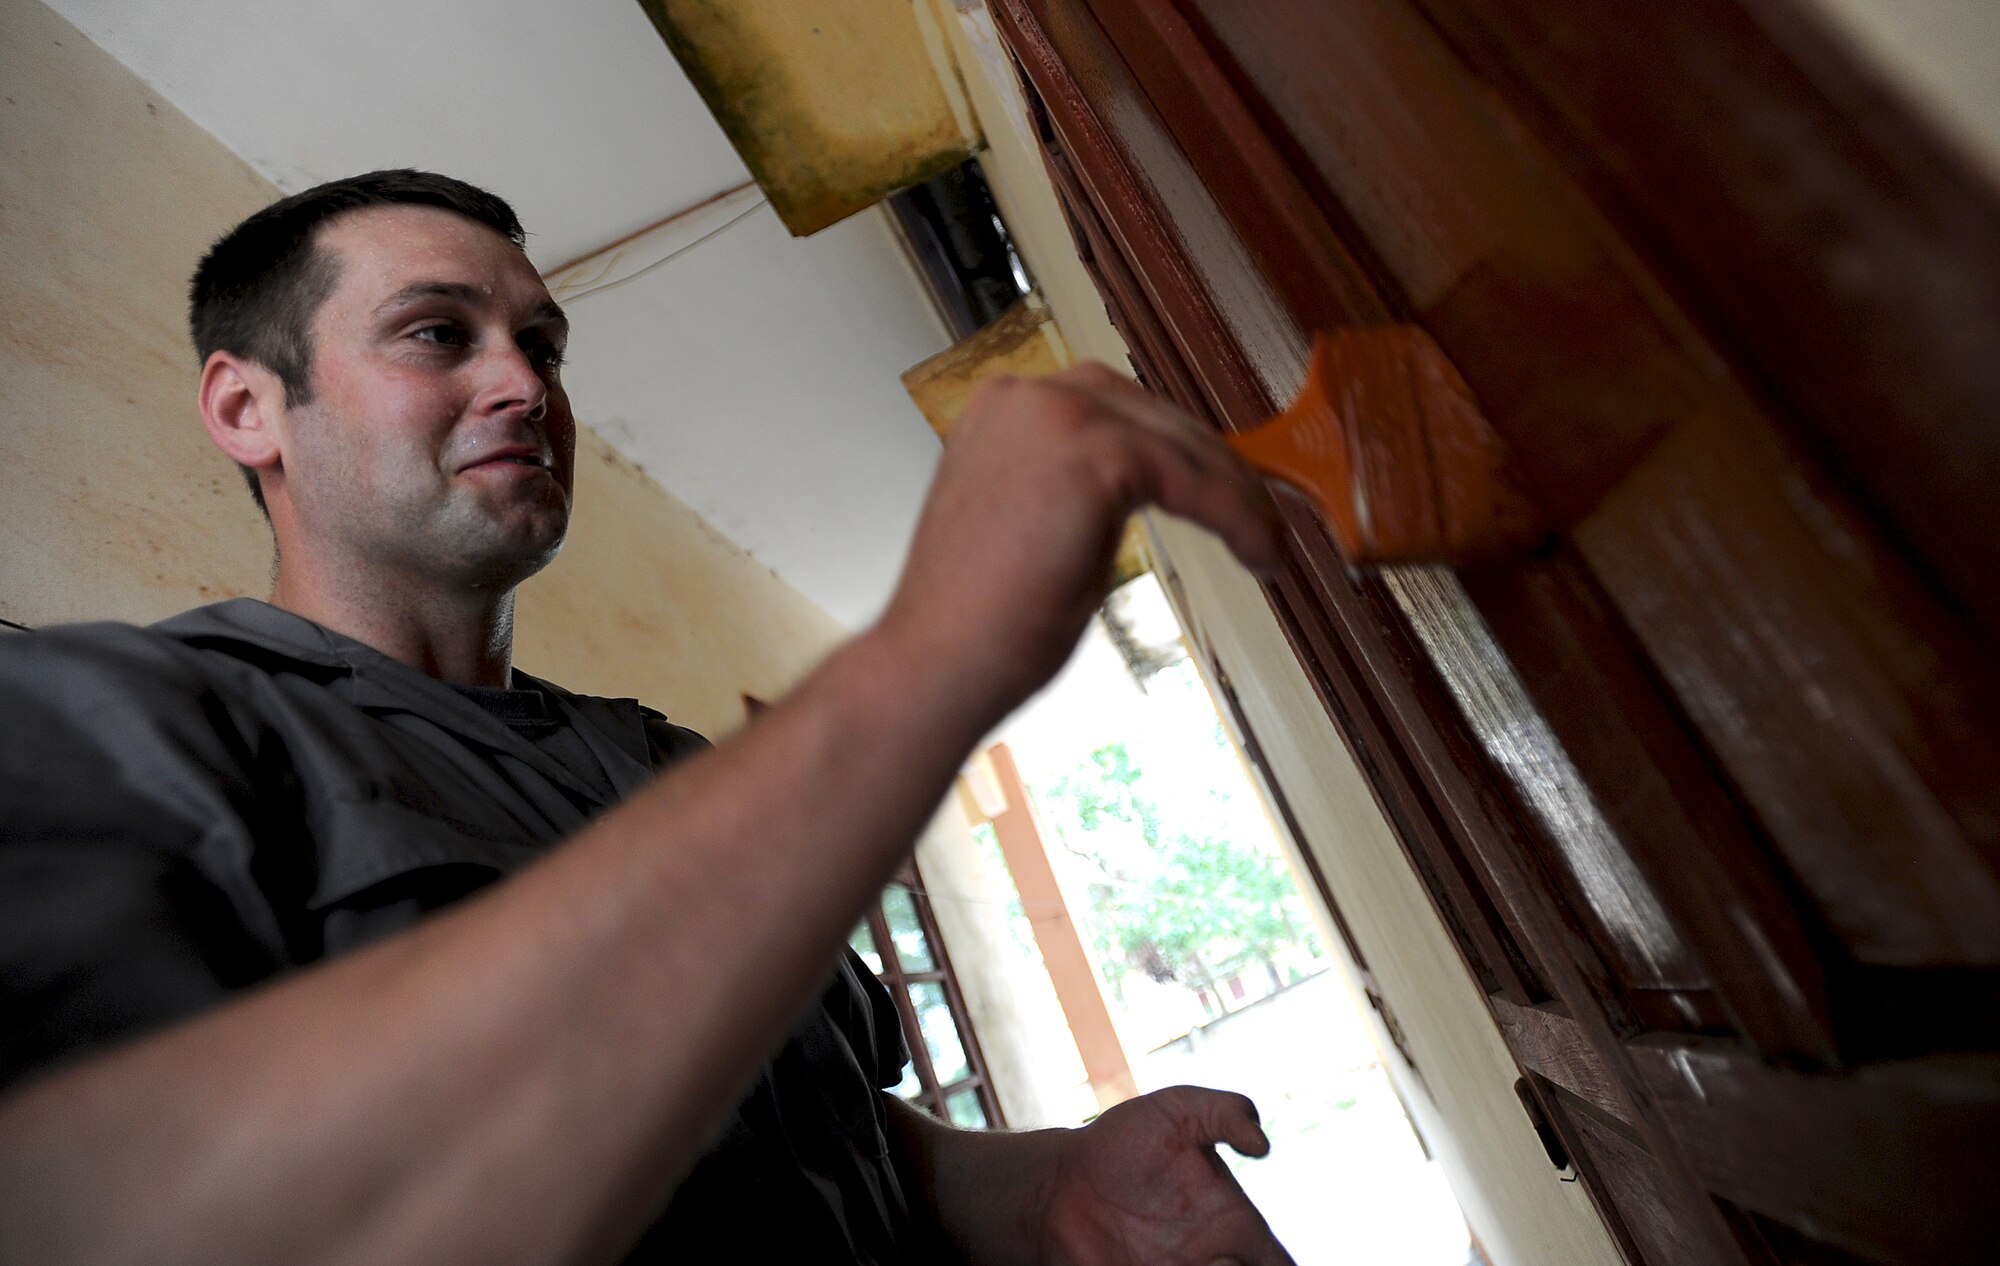 Senior Airman Chris Black, a fire fighter with the 142nd Fighter Wing out of Portland, Oregon, paints shutters for a local school in Dong Hoi, Quang Binh Province, Vietnam as part of Operation Pacific Angel 2013, June 11, 2013. U.S. Military members carry out various construction projects as part of Engineering Civil Action Programs during the operation.  Operation PACANGEL is a joint and combined humanitarian assistance exercise held in various countries several times a year and includes medical, dental, optometry, engineering programs and a variety of subject-matter expert exchanges. (U.S. Air Force photo by Staff Sgt. Sara Csurilla)